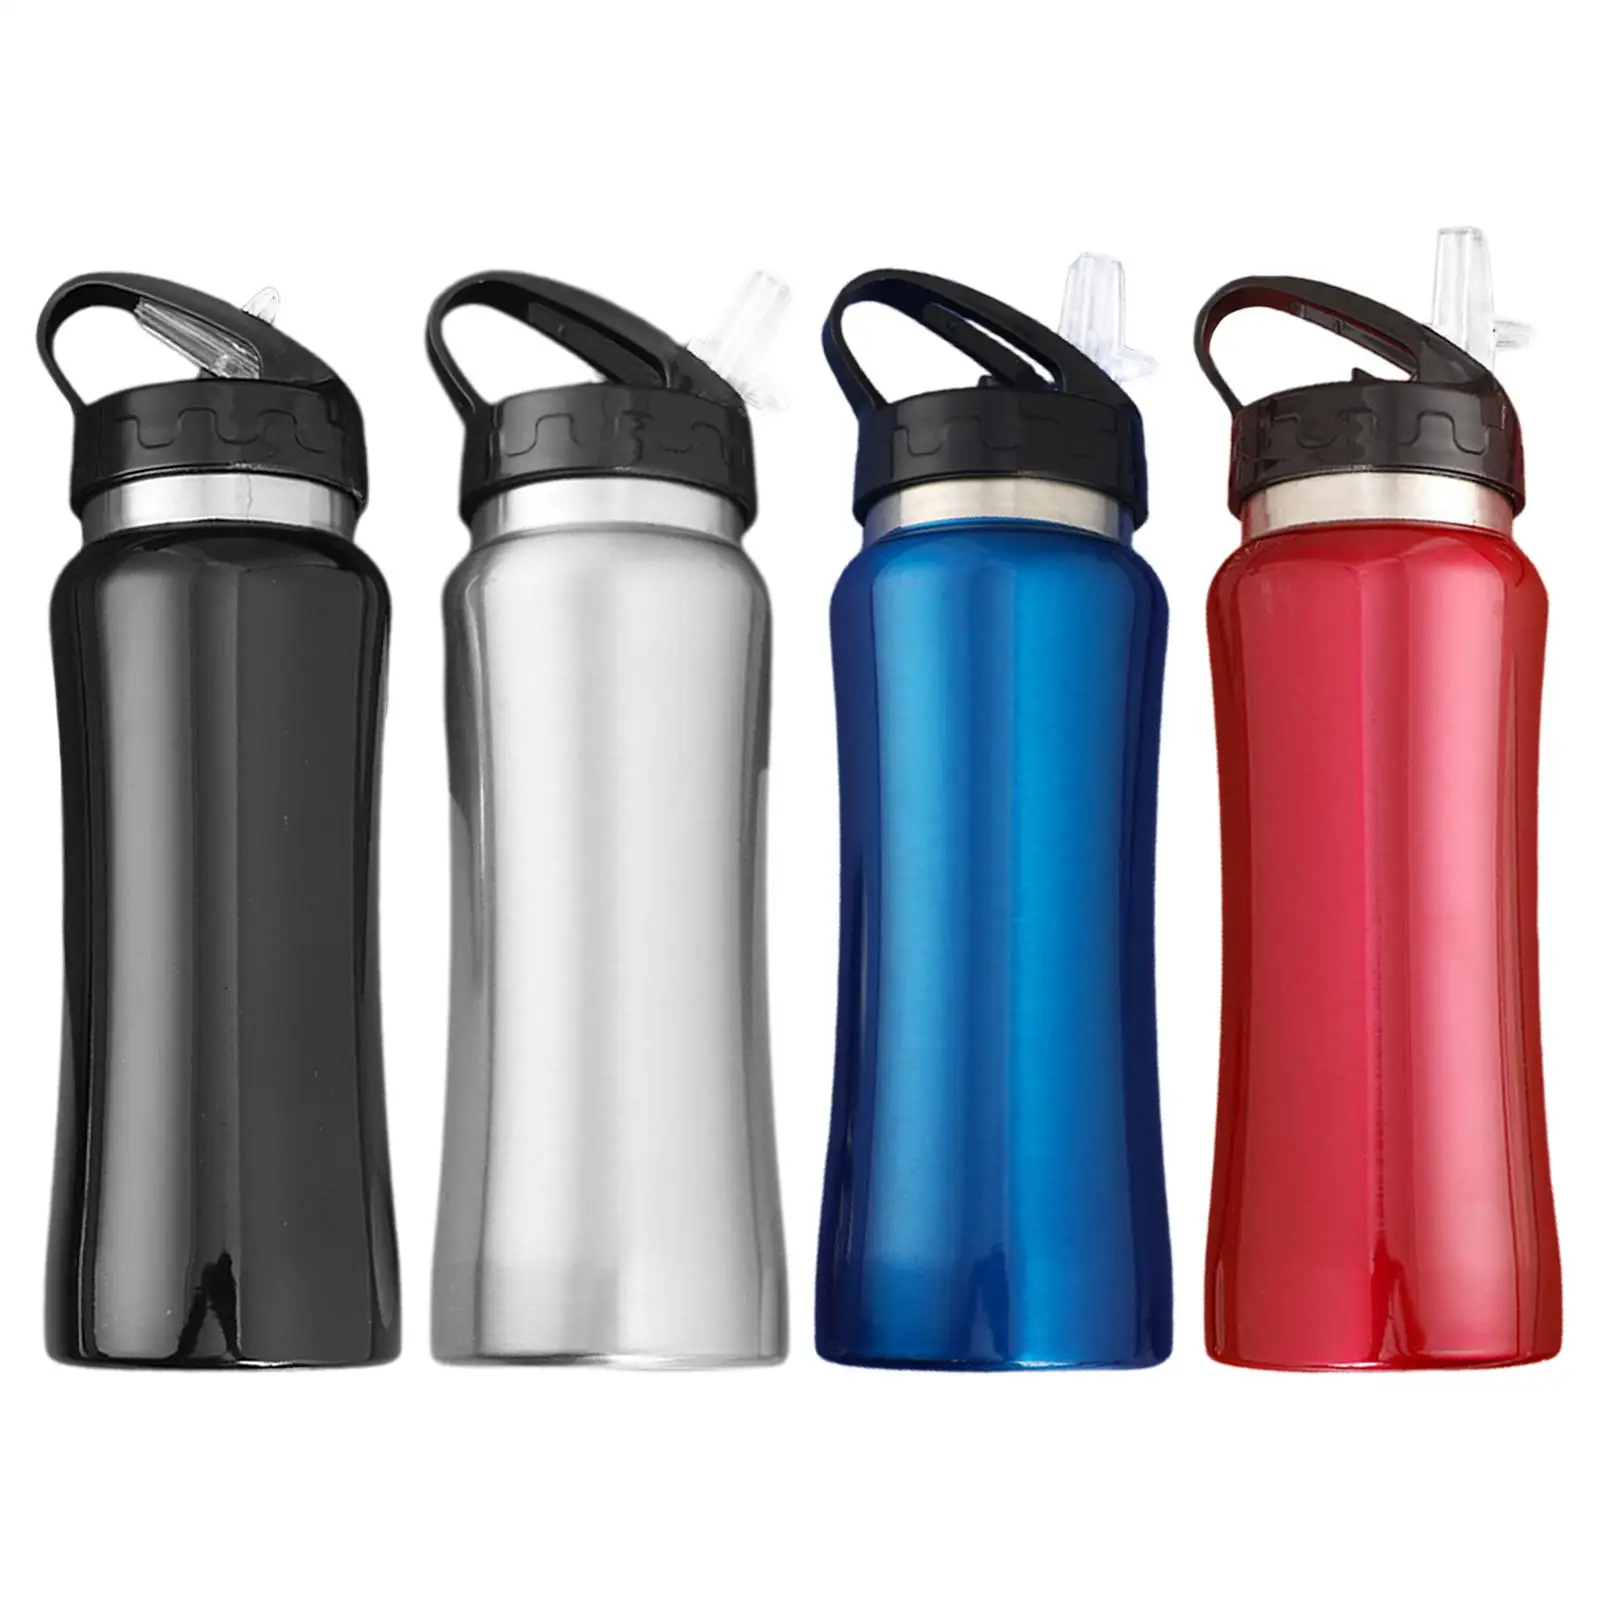 700ml Bottle Drinking Kettle for Outdoor Sports Fitness Running Gym Workout Cycling Travel Camping Accessories